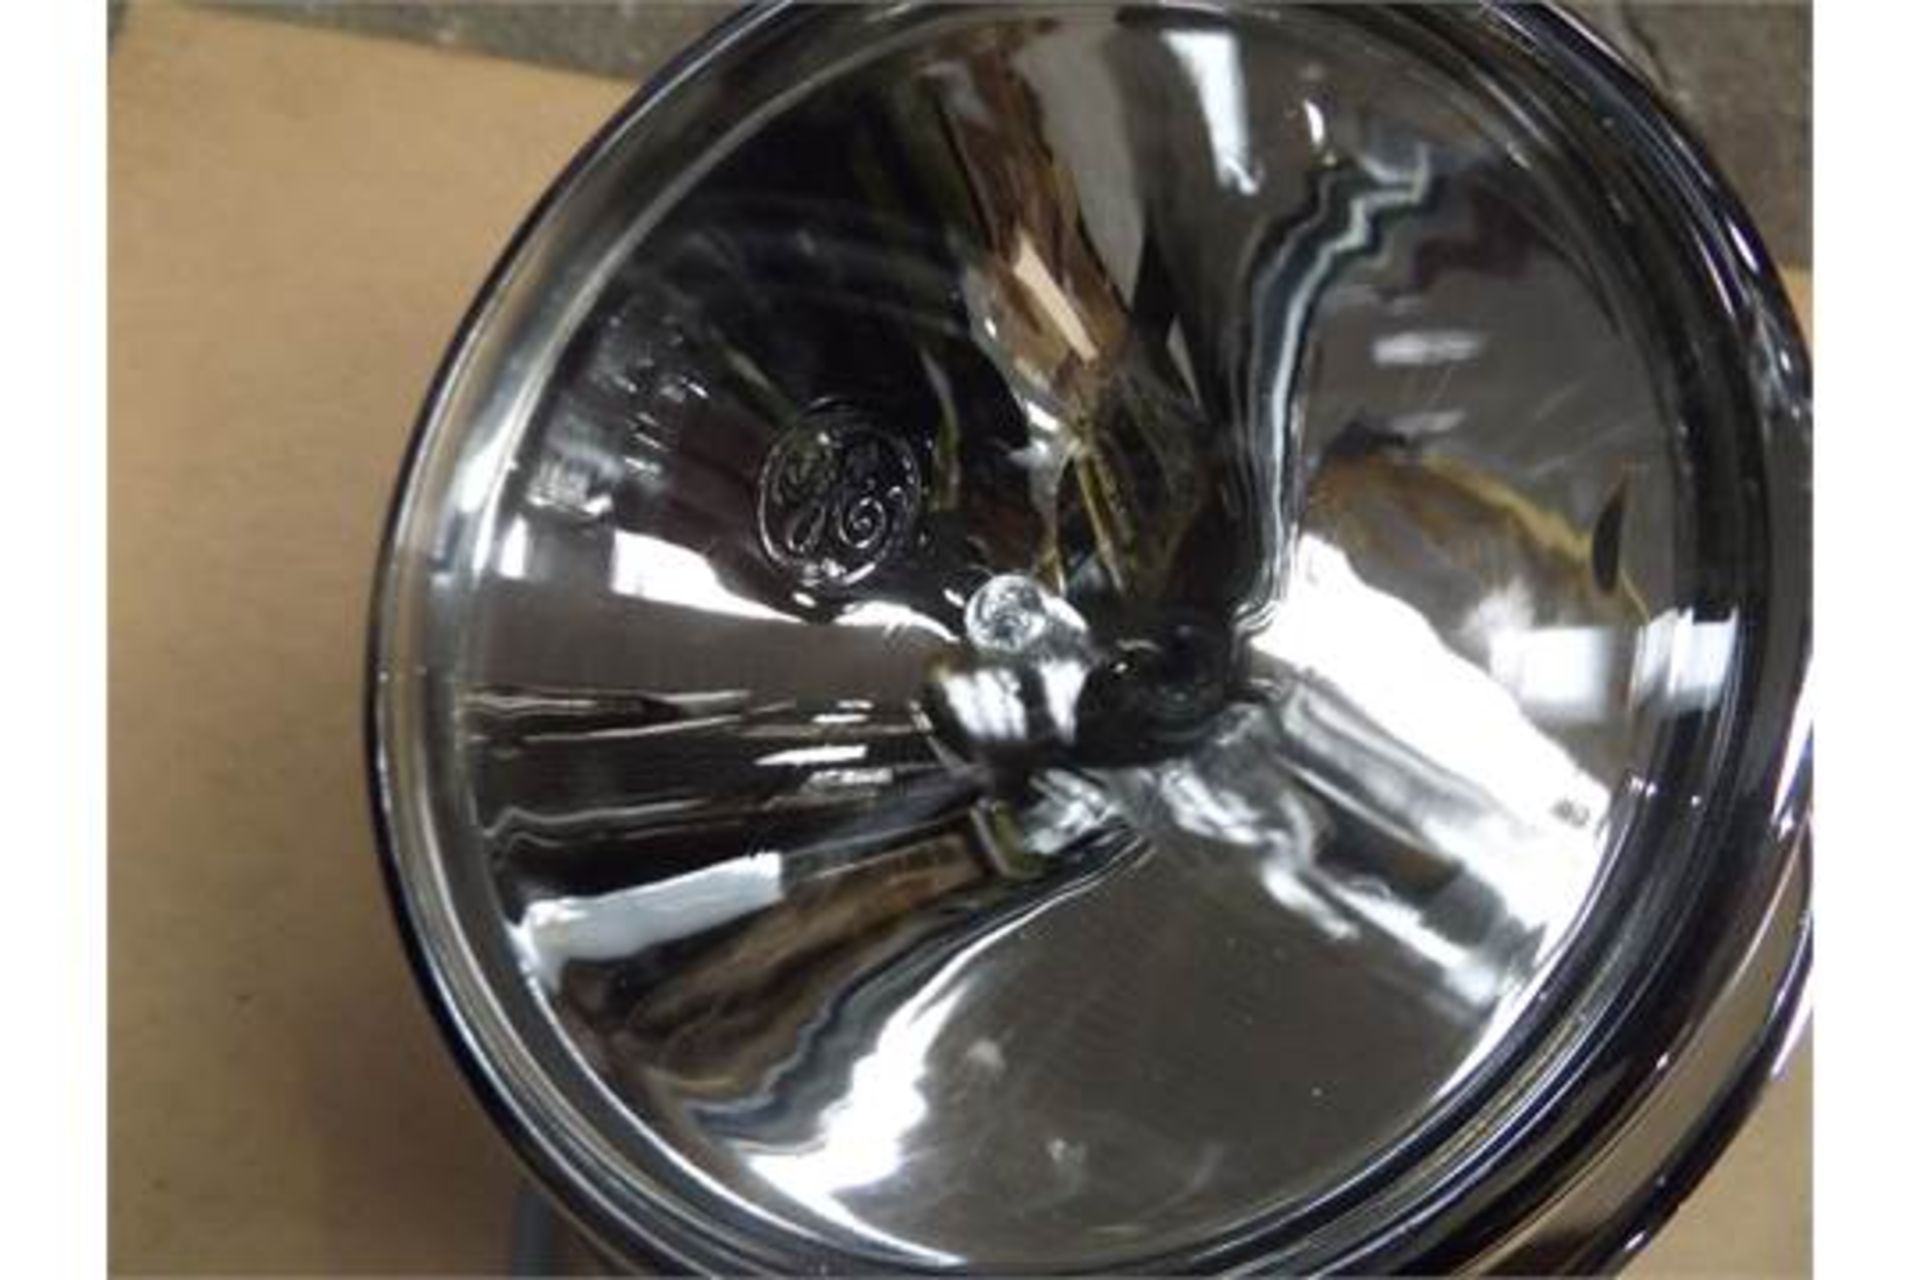 2 x General Electric Halogen Vehicle Spot Lamp Assys - Image 3 of 4